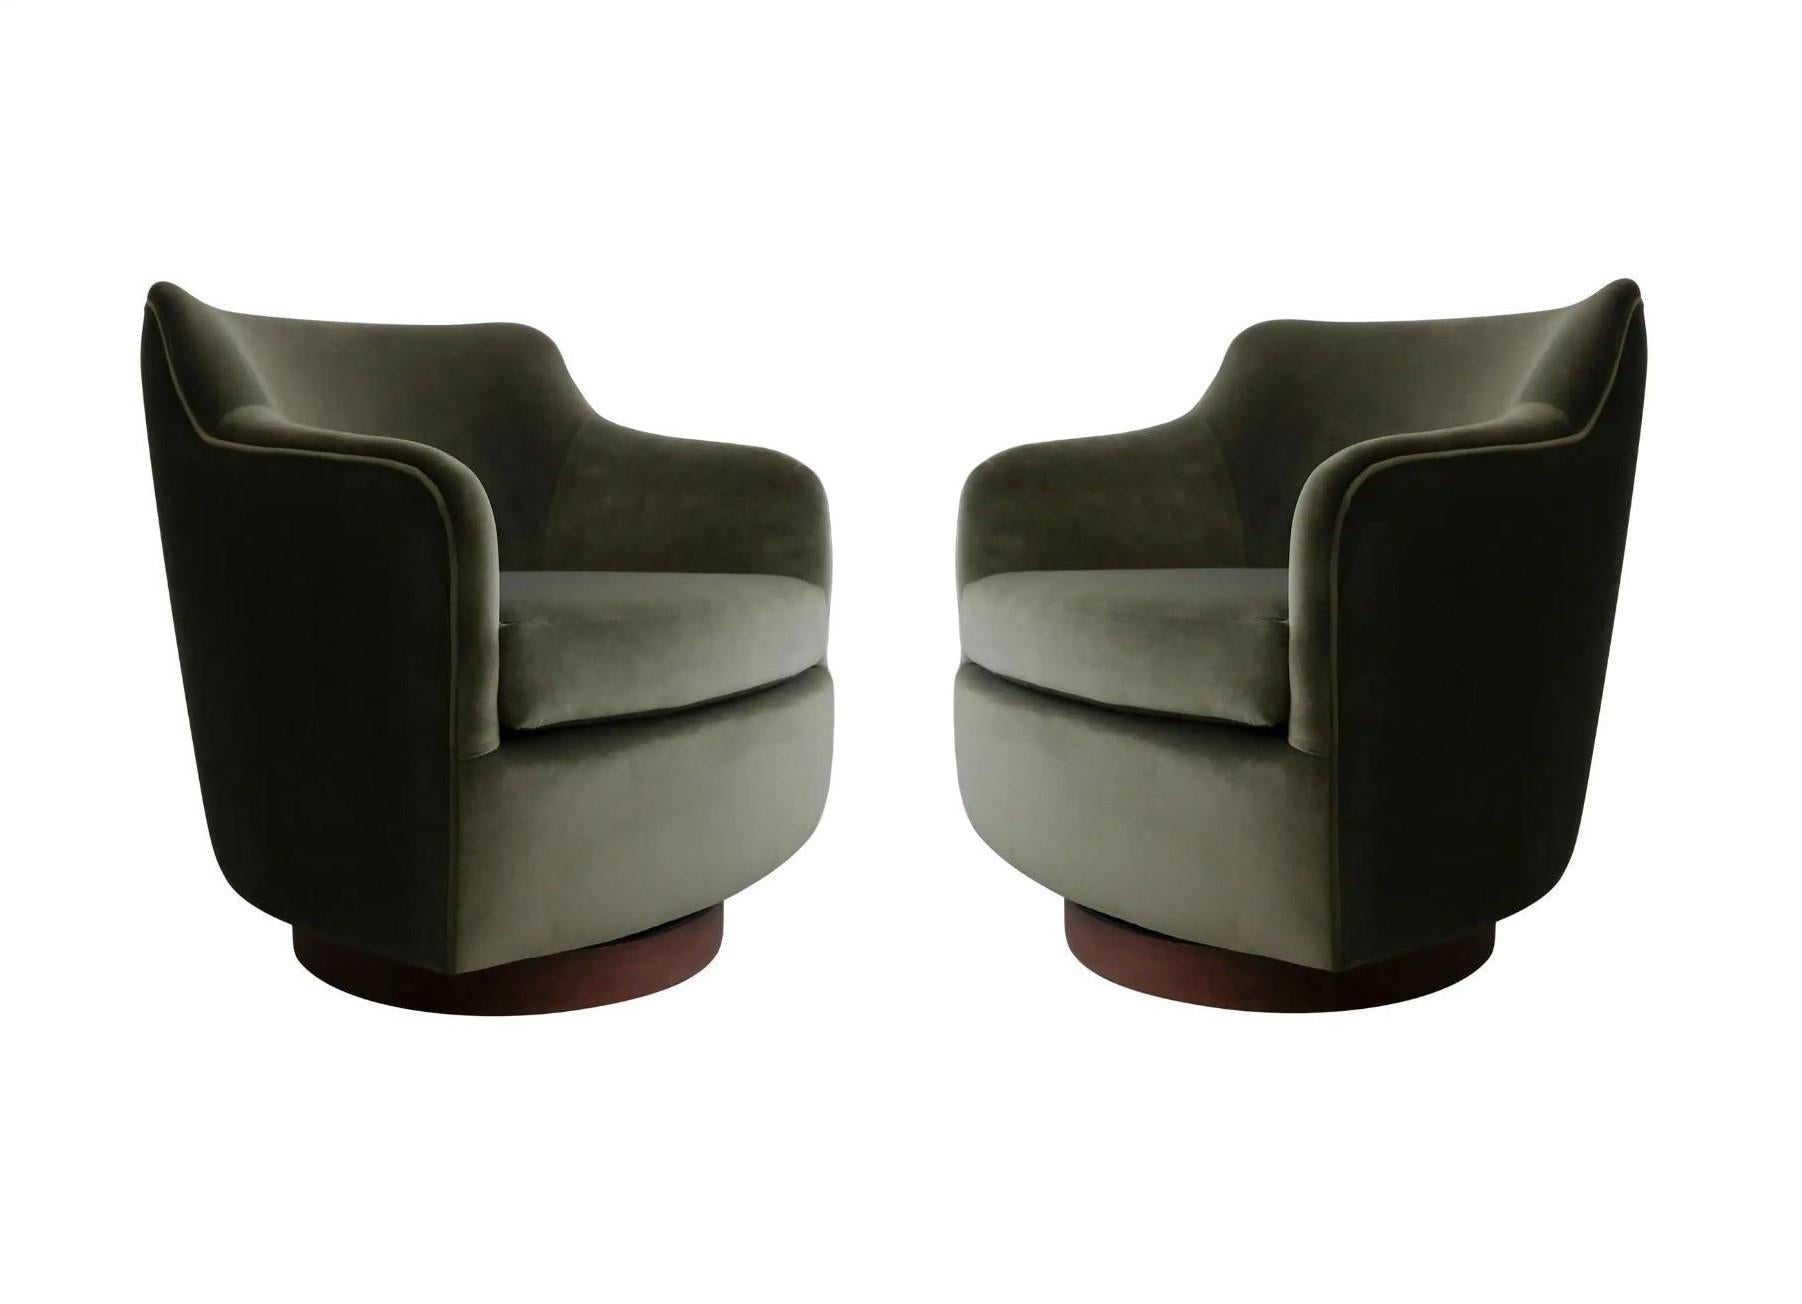 Timeless style and exceptional tailoring distinguish this beautiful pair of swivel chairs model 1170 designed by the esteemed American designer Milo Baughman for Thayer coggin. His signature style, defined by clean lines and architectural